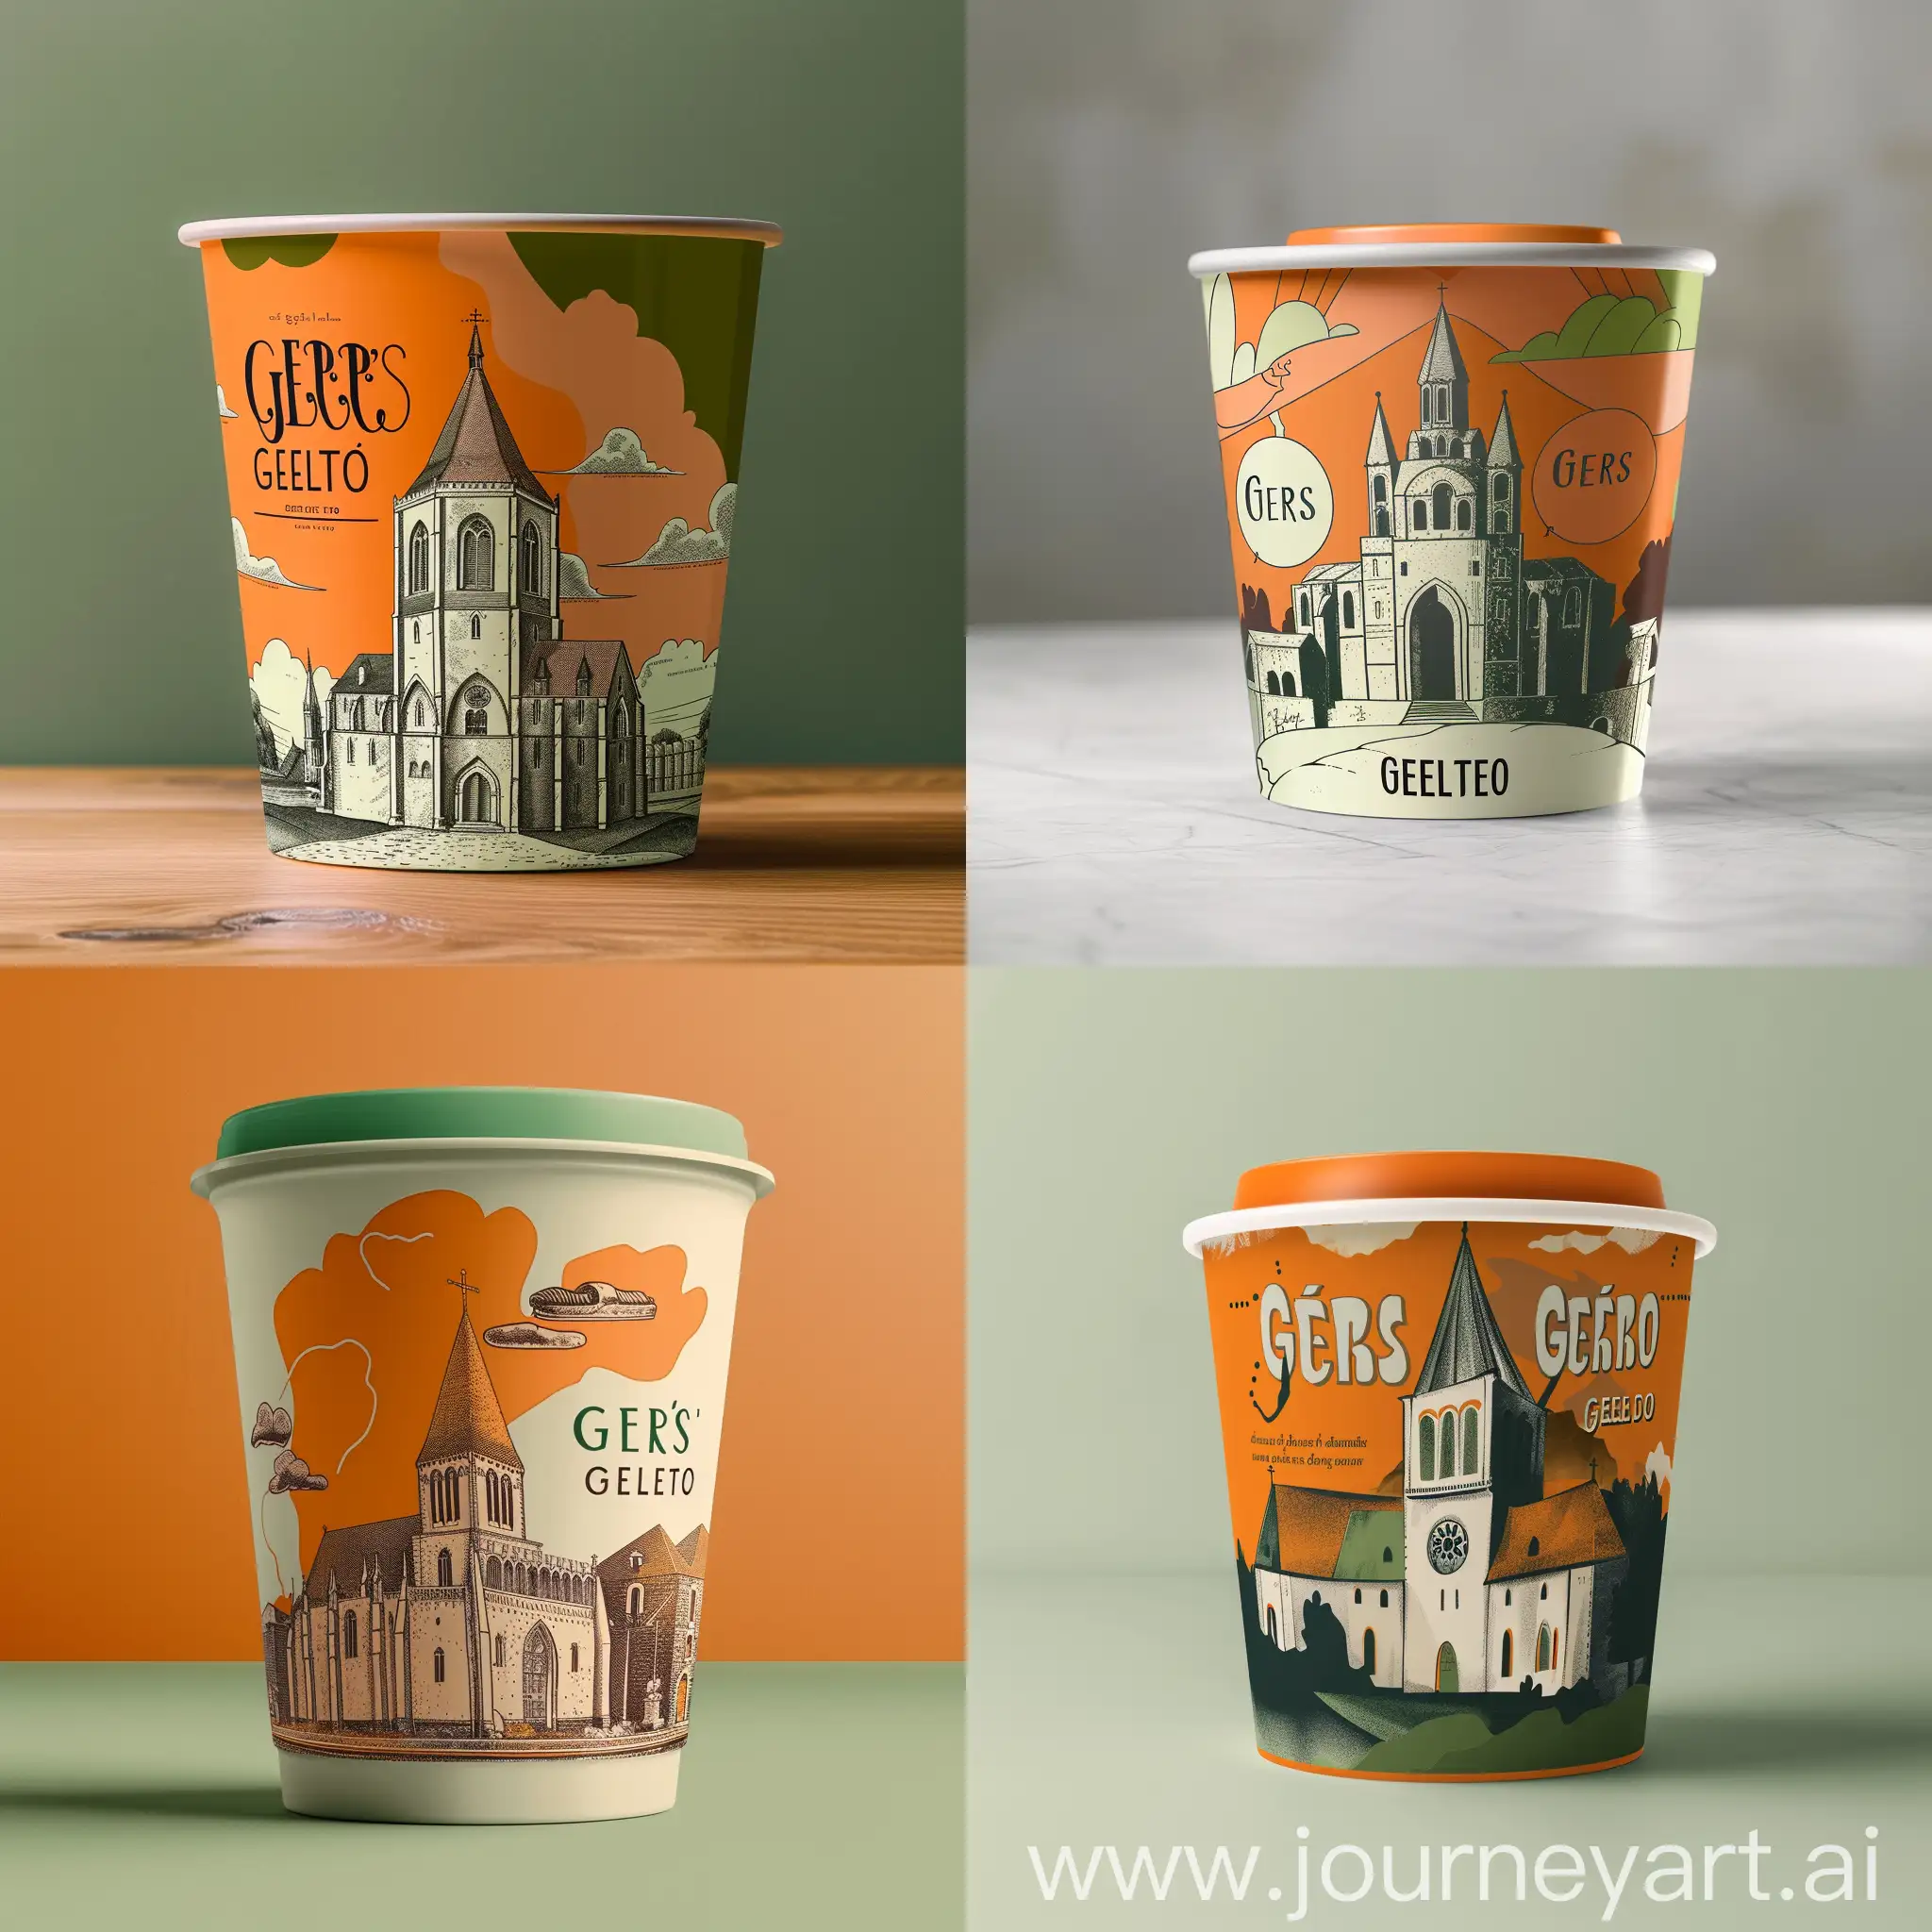 design for take-away ice cream tub, modern image of 13th century French church on tub, name of ice cream is Gers Gelato, writing in large modern font, colour scheme orange and green